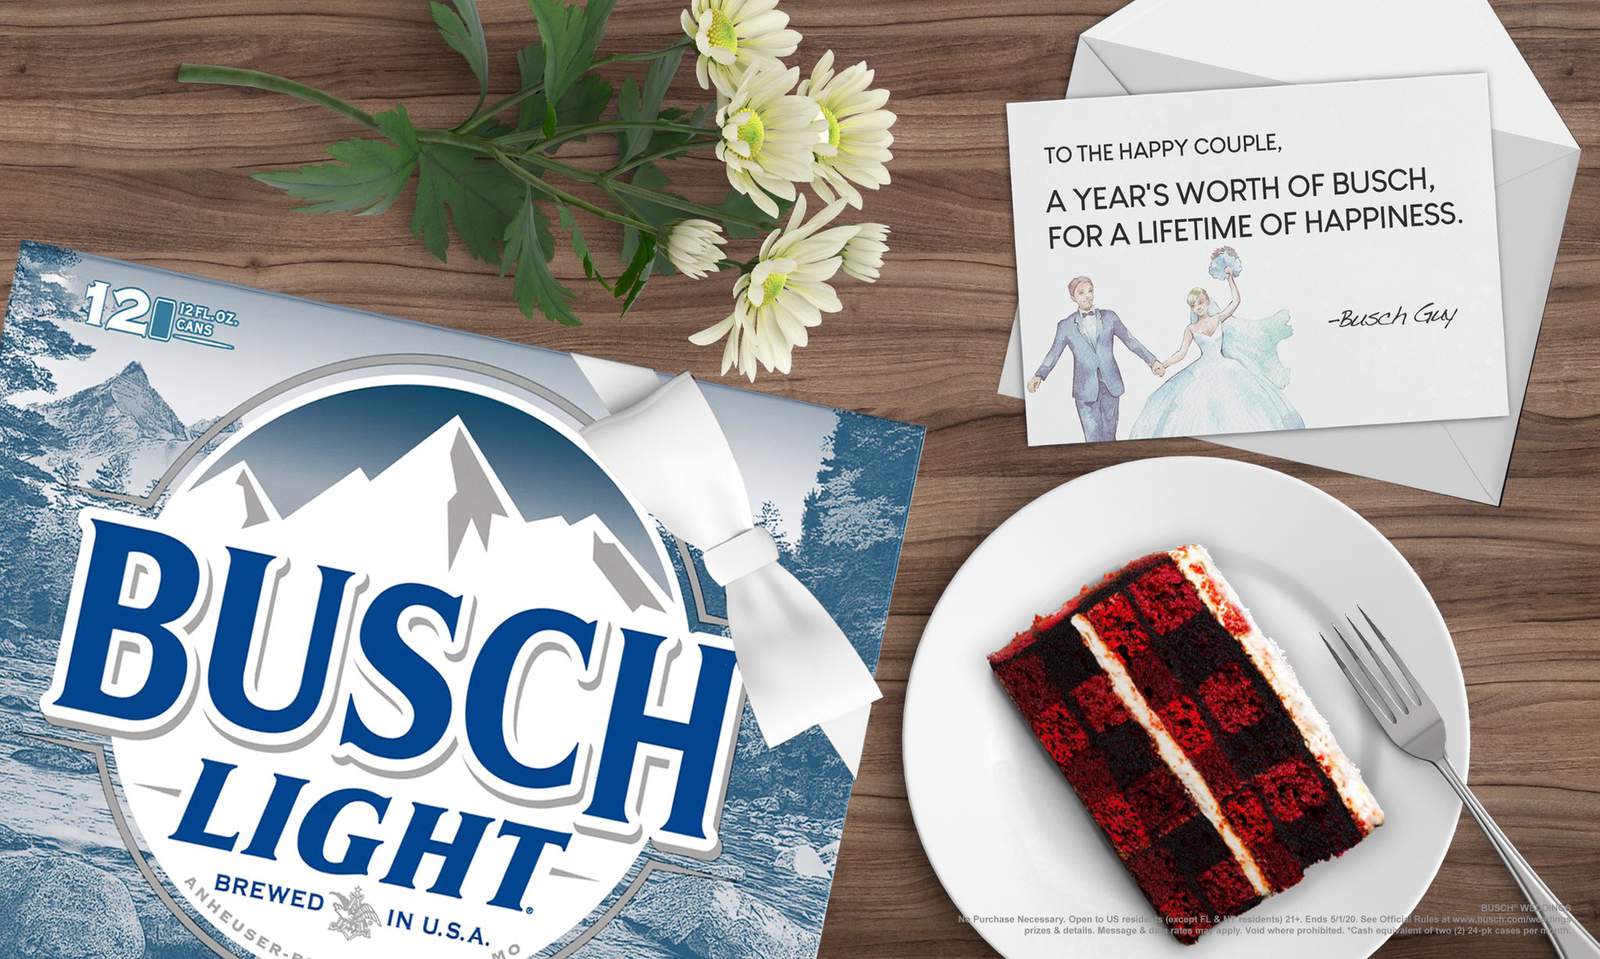 Did you postpone a wedding due to coronavirus? Busch wants to give you free beer for a year